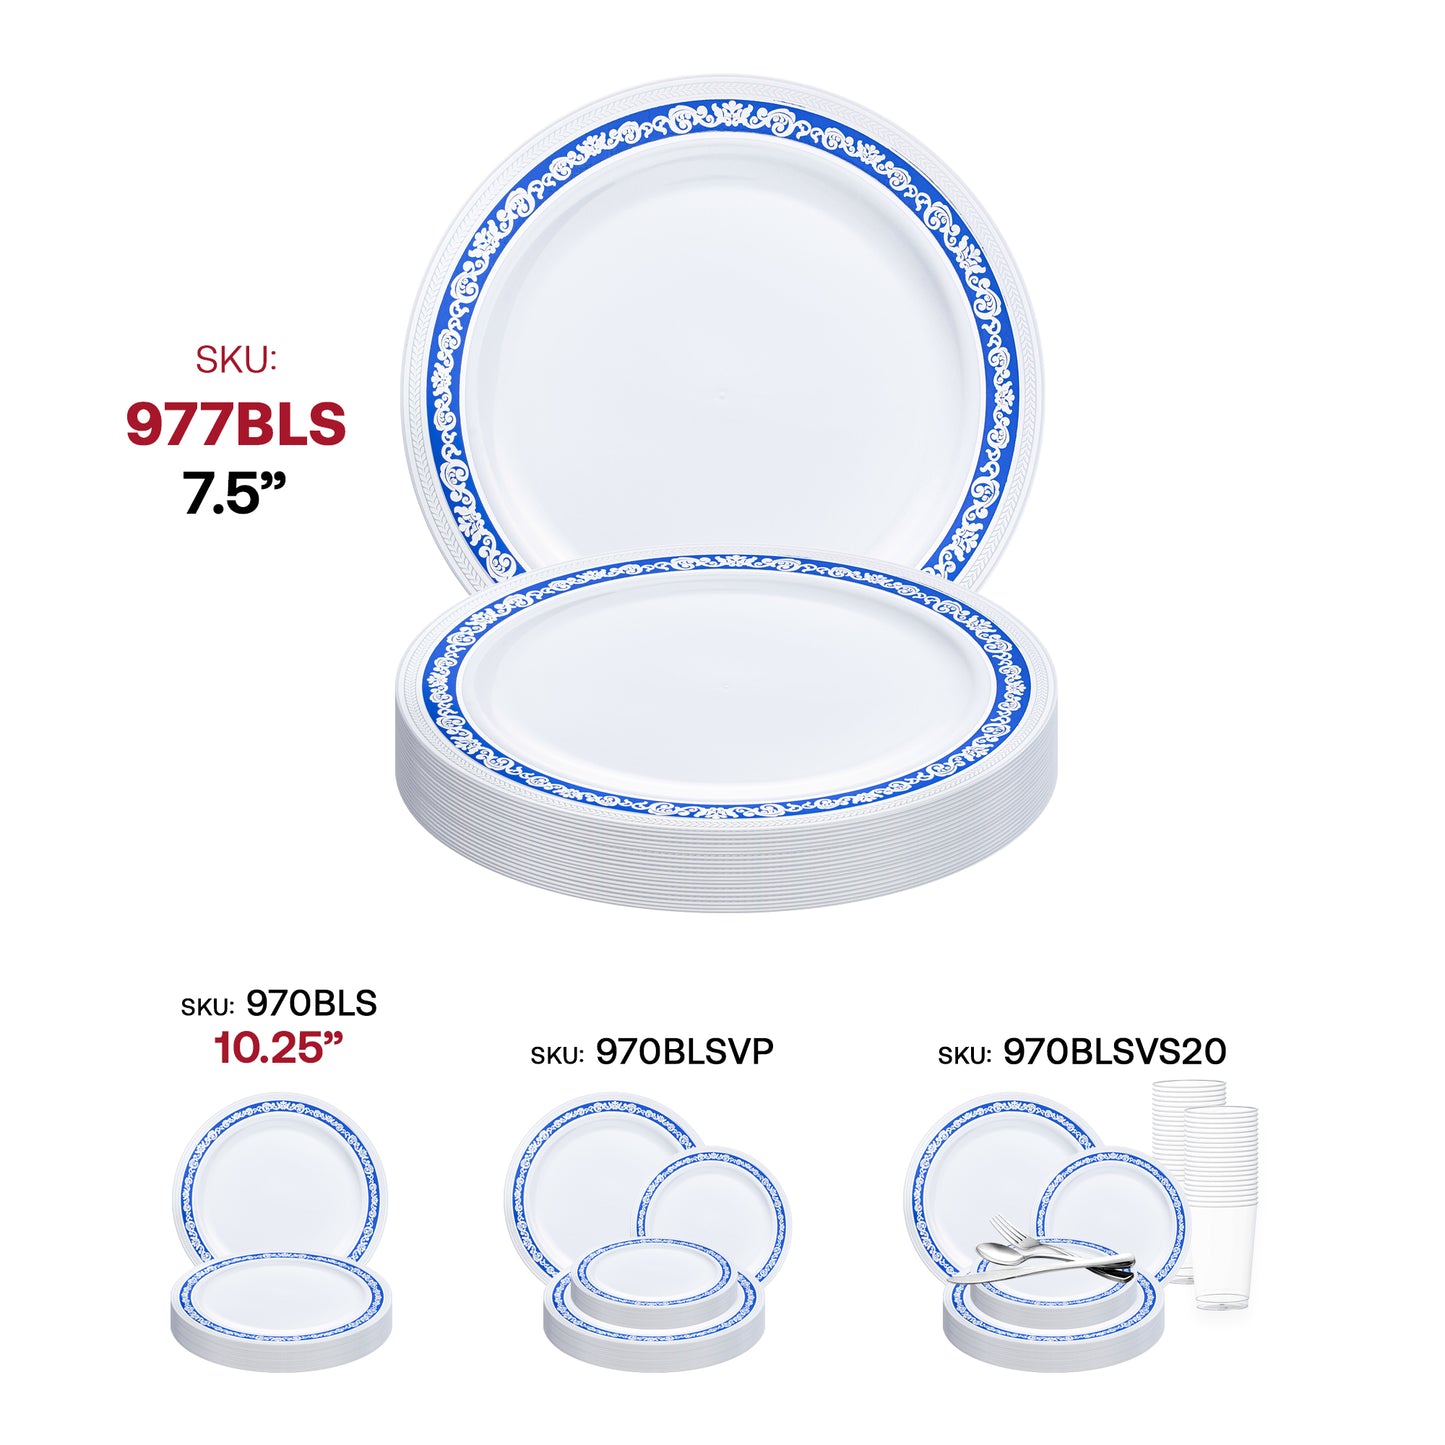 White with Blue and Silver Royal Rim Plastic Appetizer/Salad Plates (7.5") SKU | The Kaya Collection